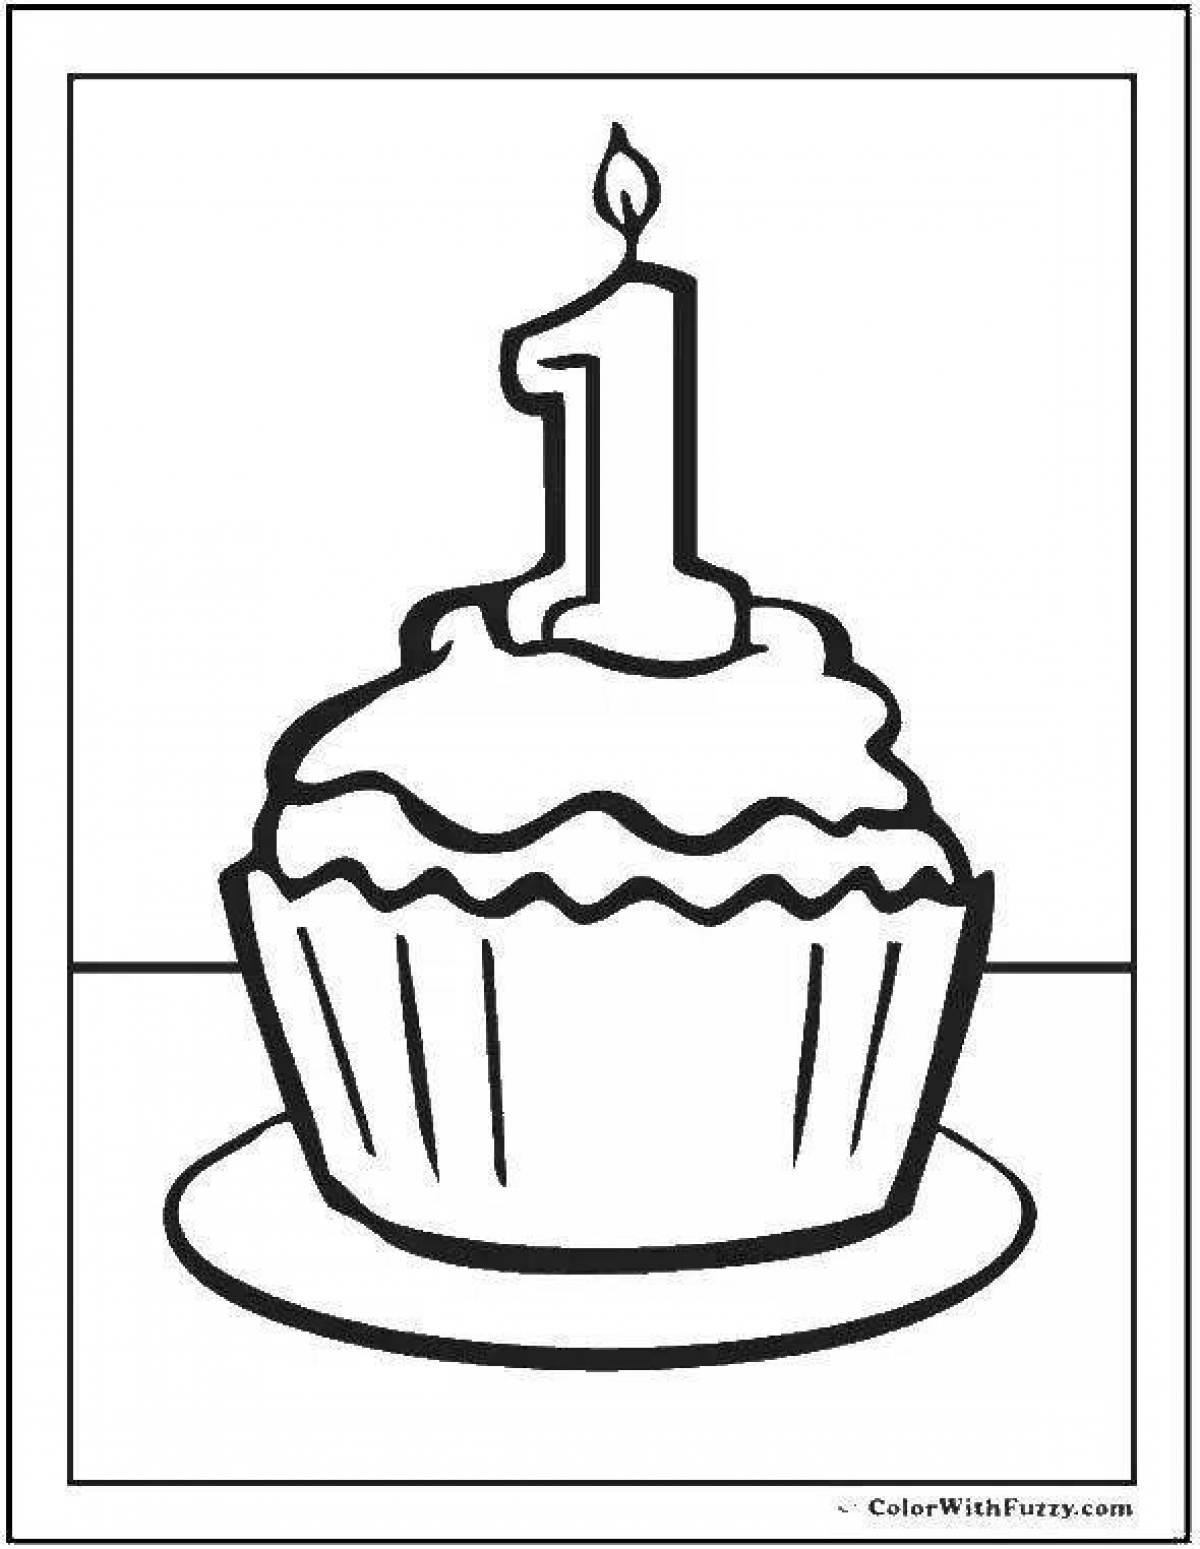 Blooming coloring page 1 year old